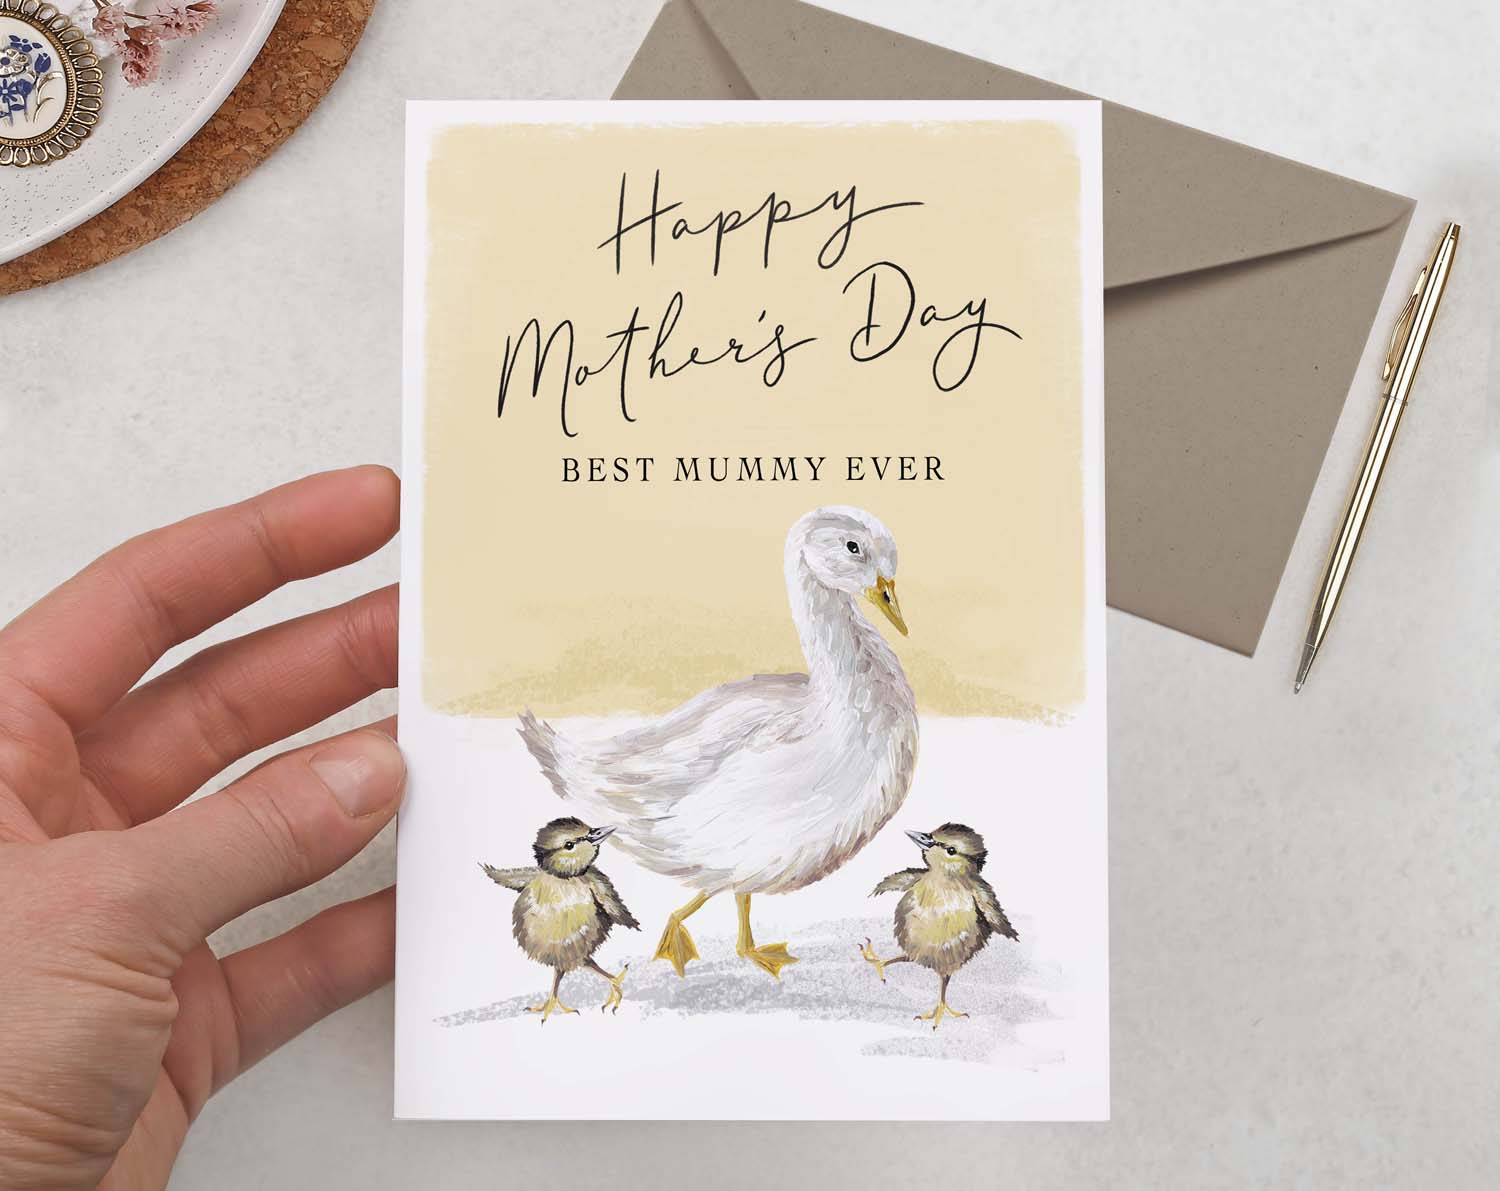 happy Mother's Day card with ducks, for mummy